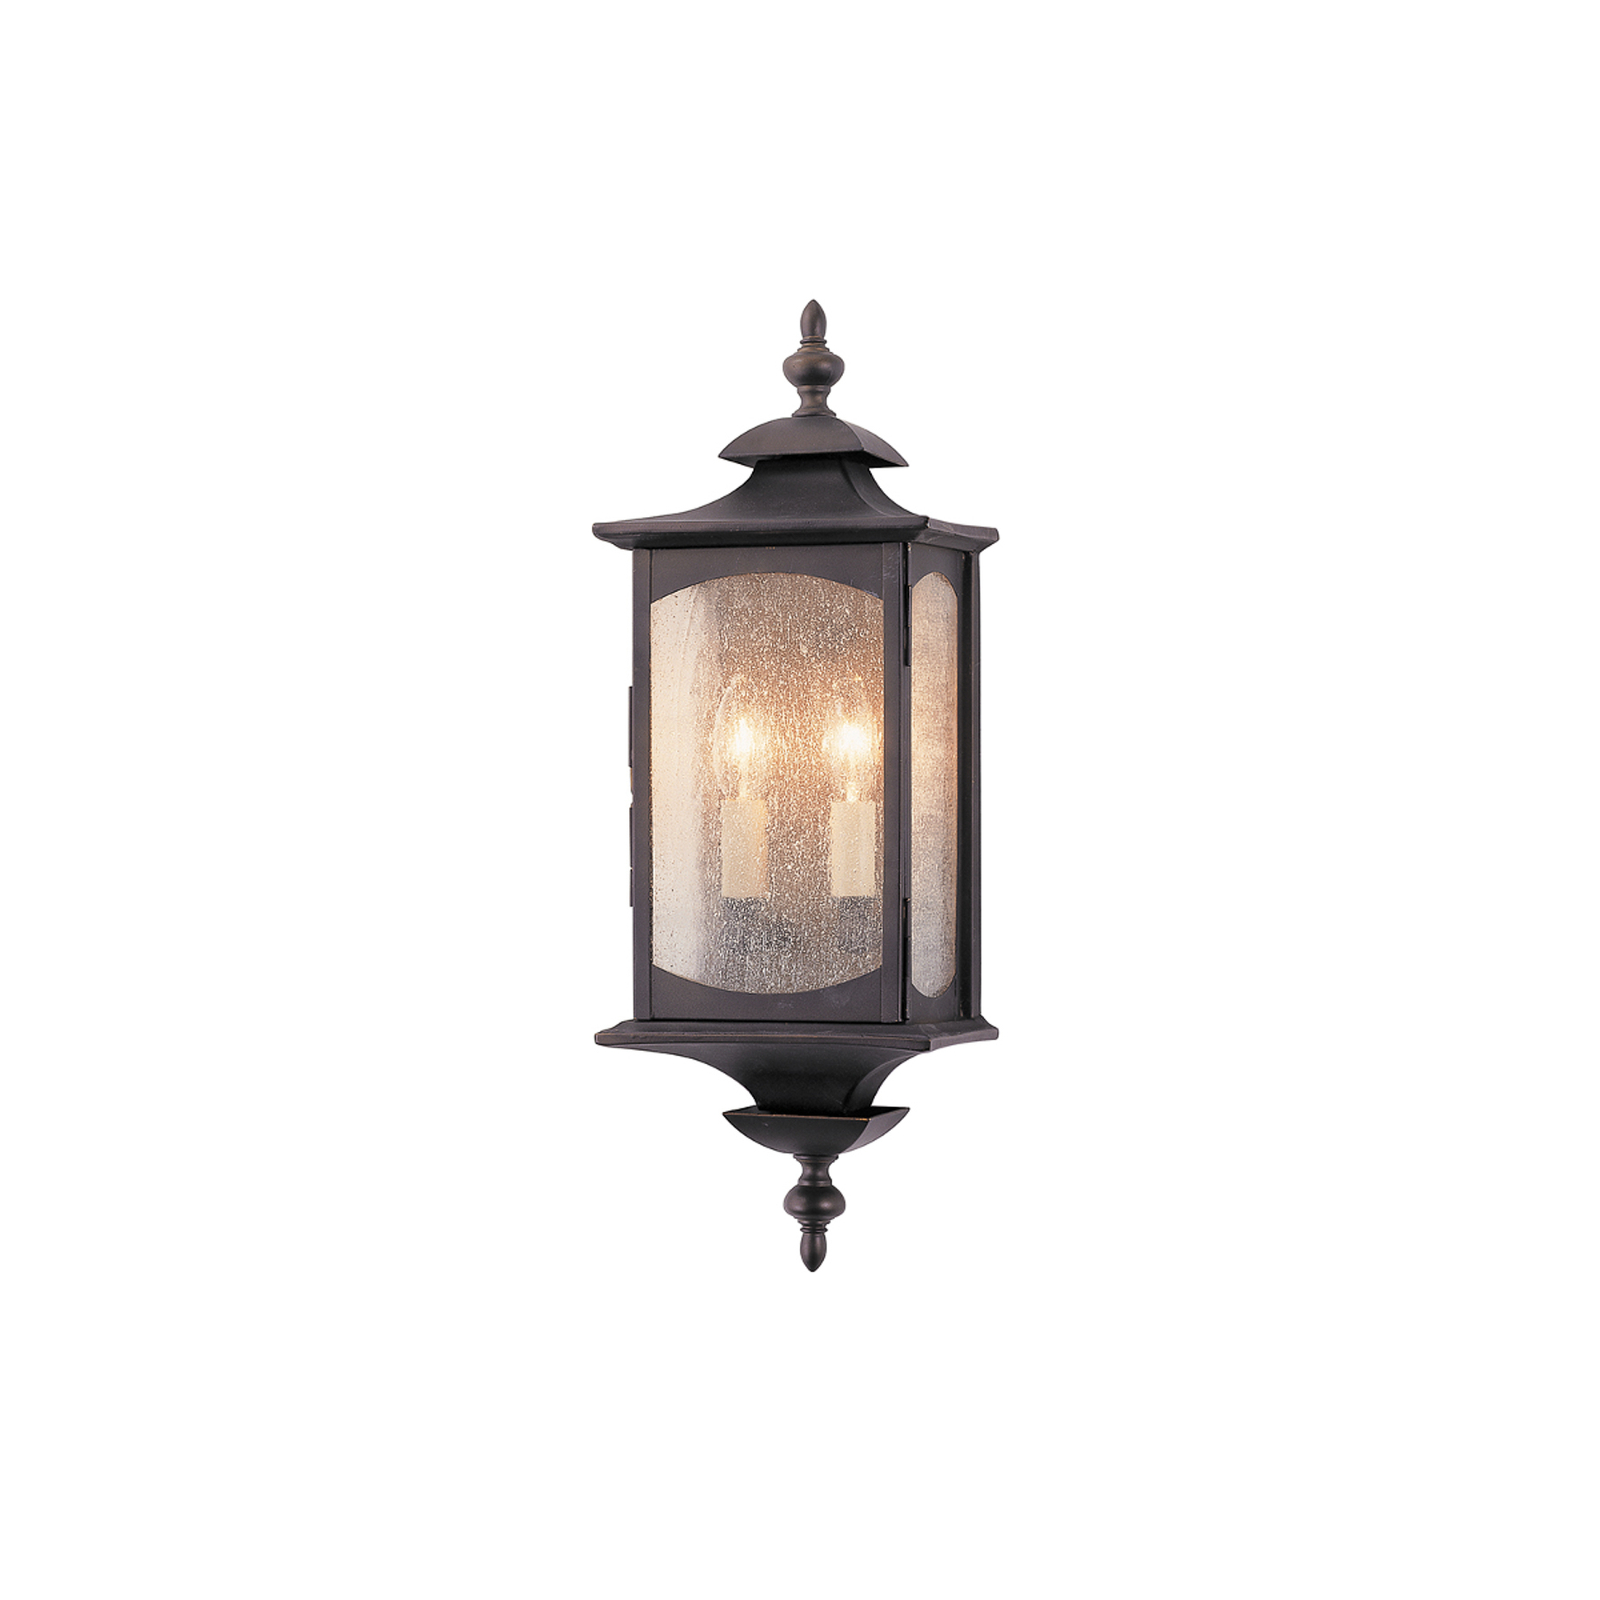 Market Square 2 outdoor wall lamp, bronze